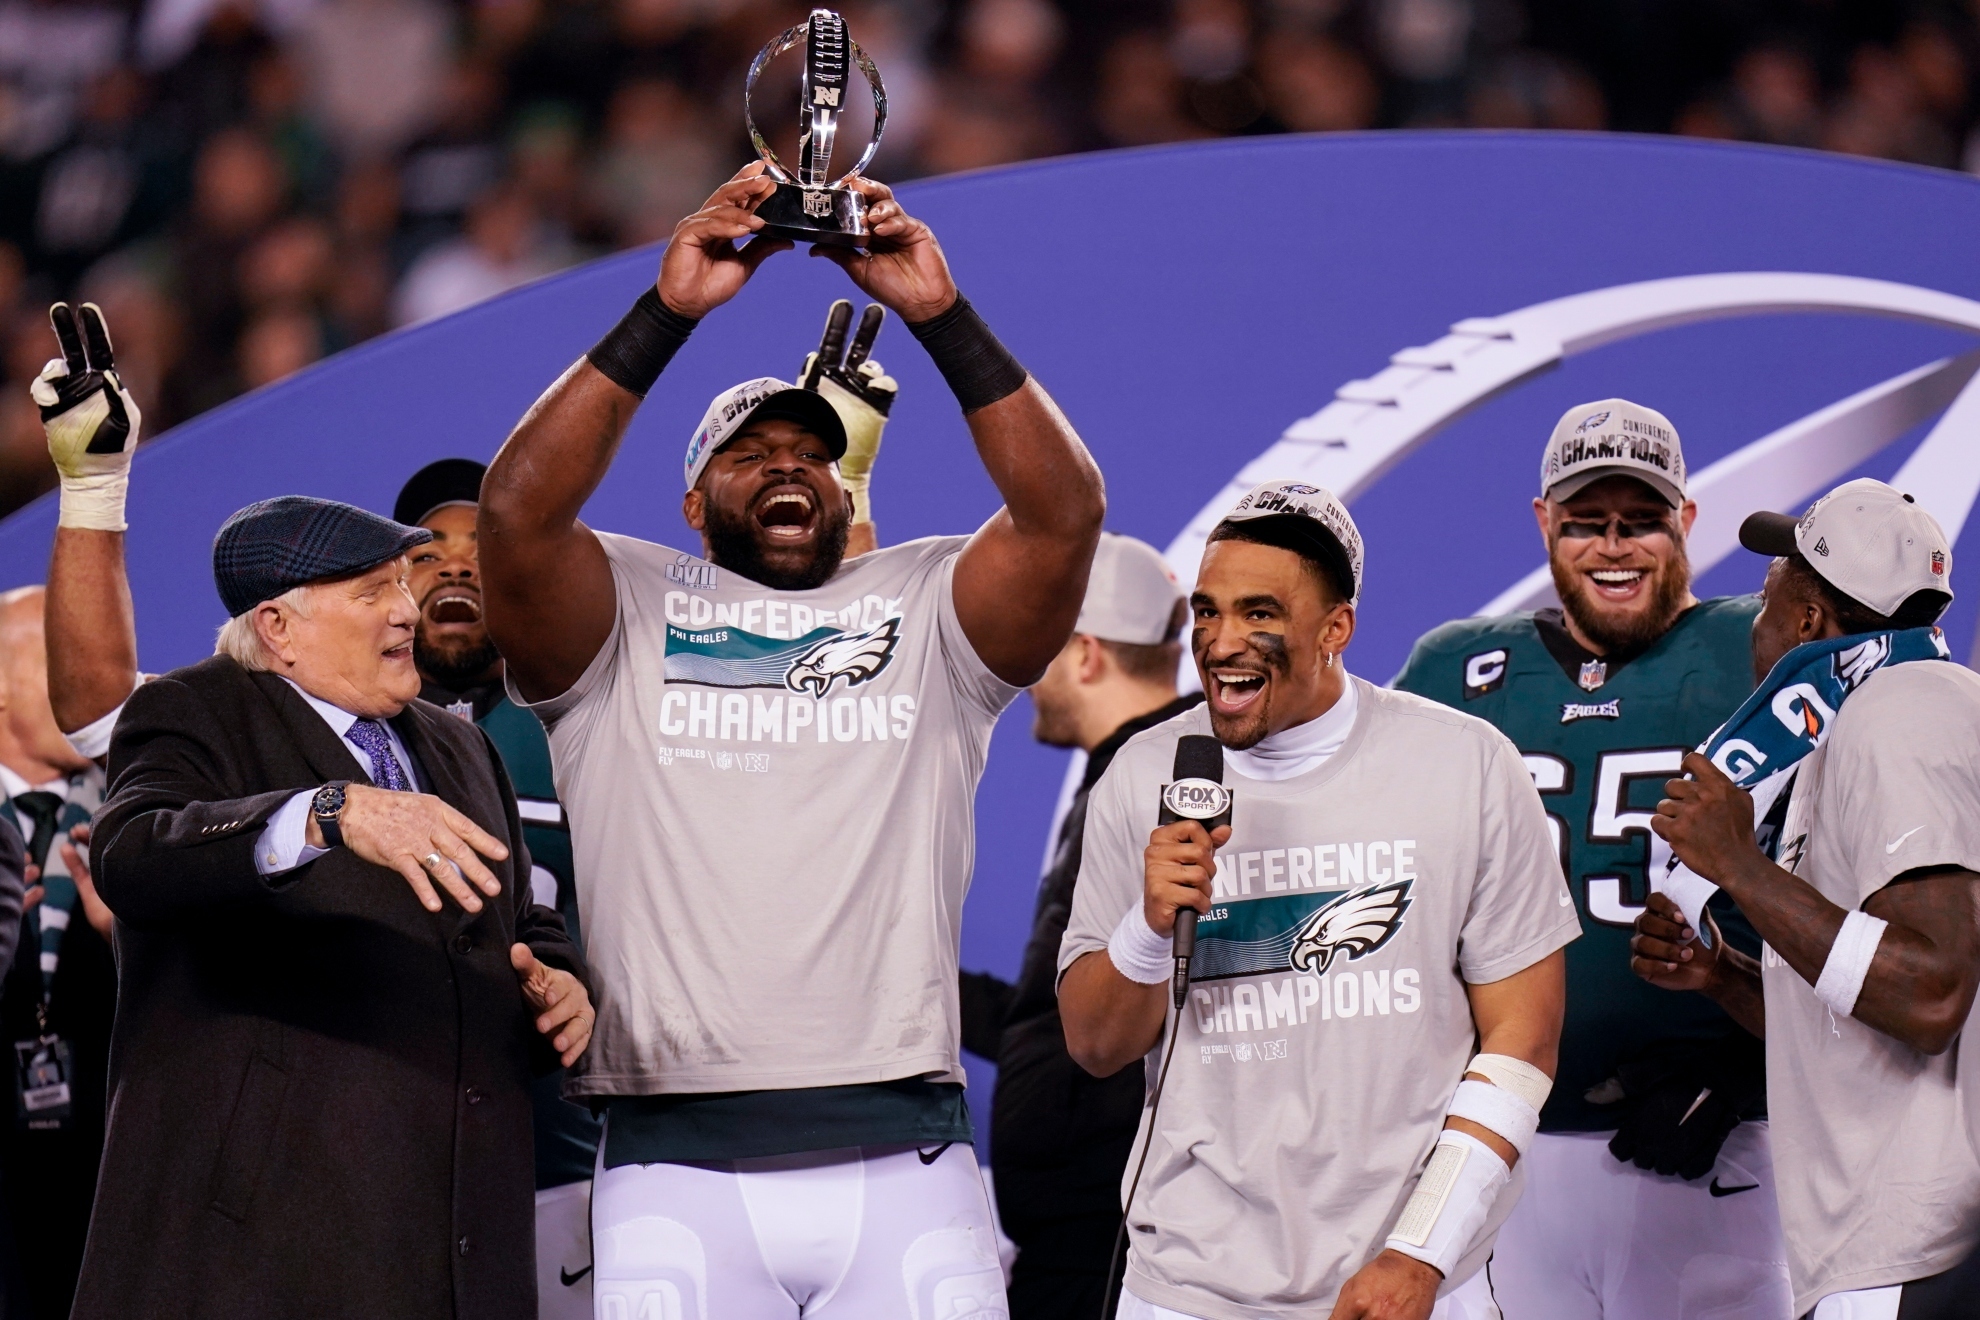 Terry Bradshaw, left, reacts as Philadelphia Eagles defensive tackle Fletcher Cox, second from left, hoists the George Halas Trophy as quarterback Jalen Hurts, center, holds a microphone after the NFC Championship NFL football game between the Philadelphia Eagles and the San Francisco 49ers